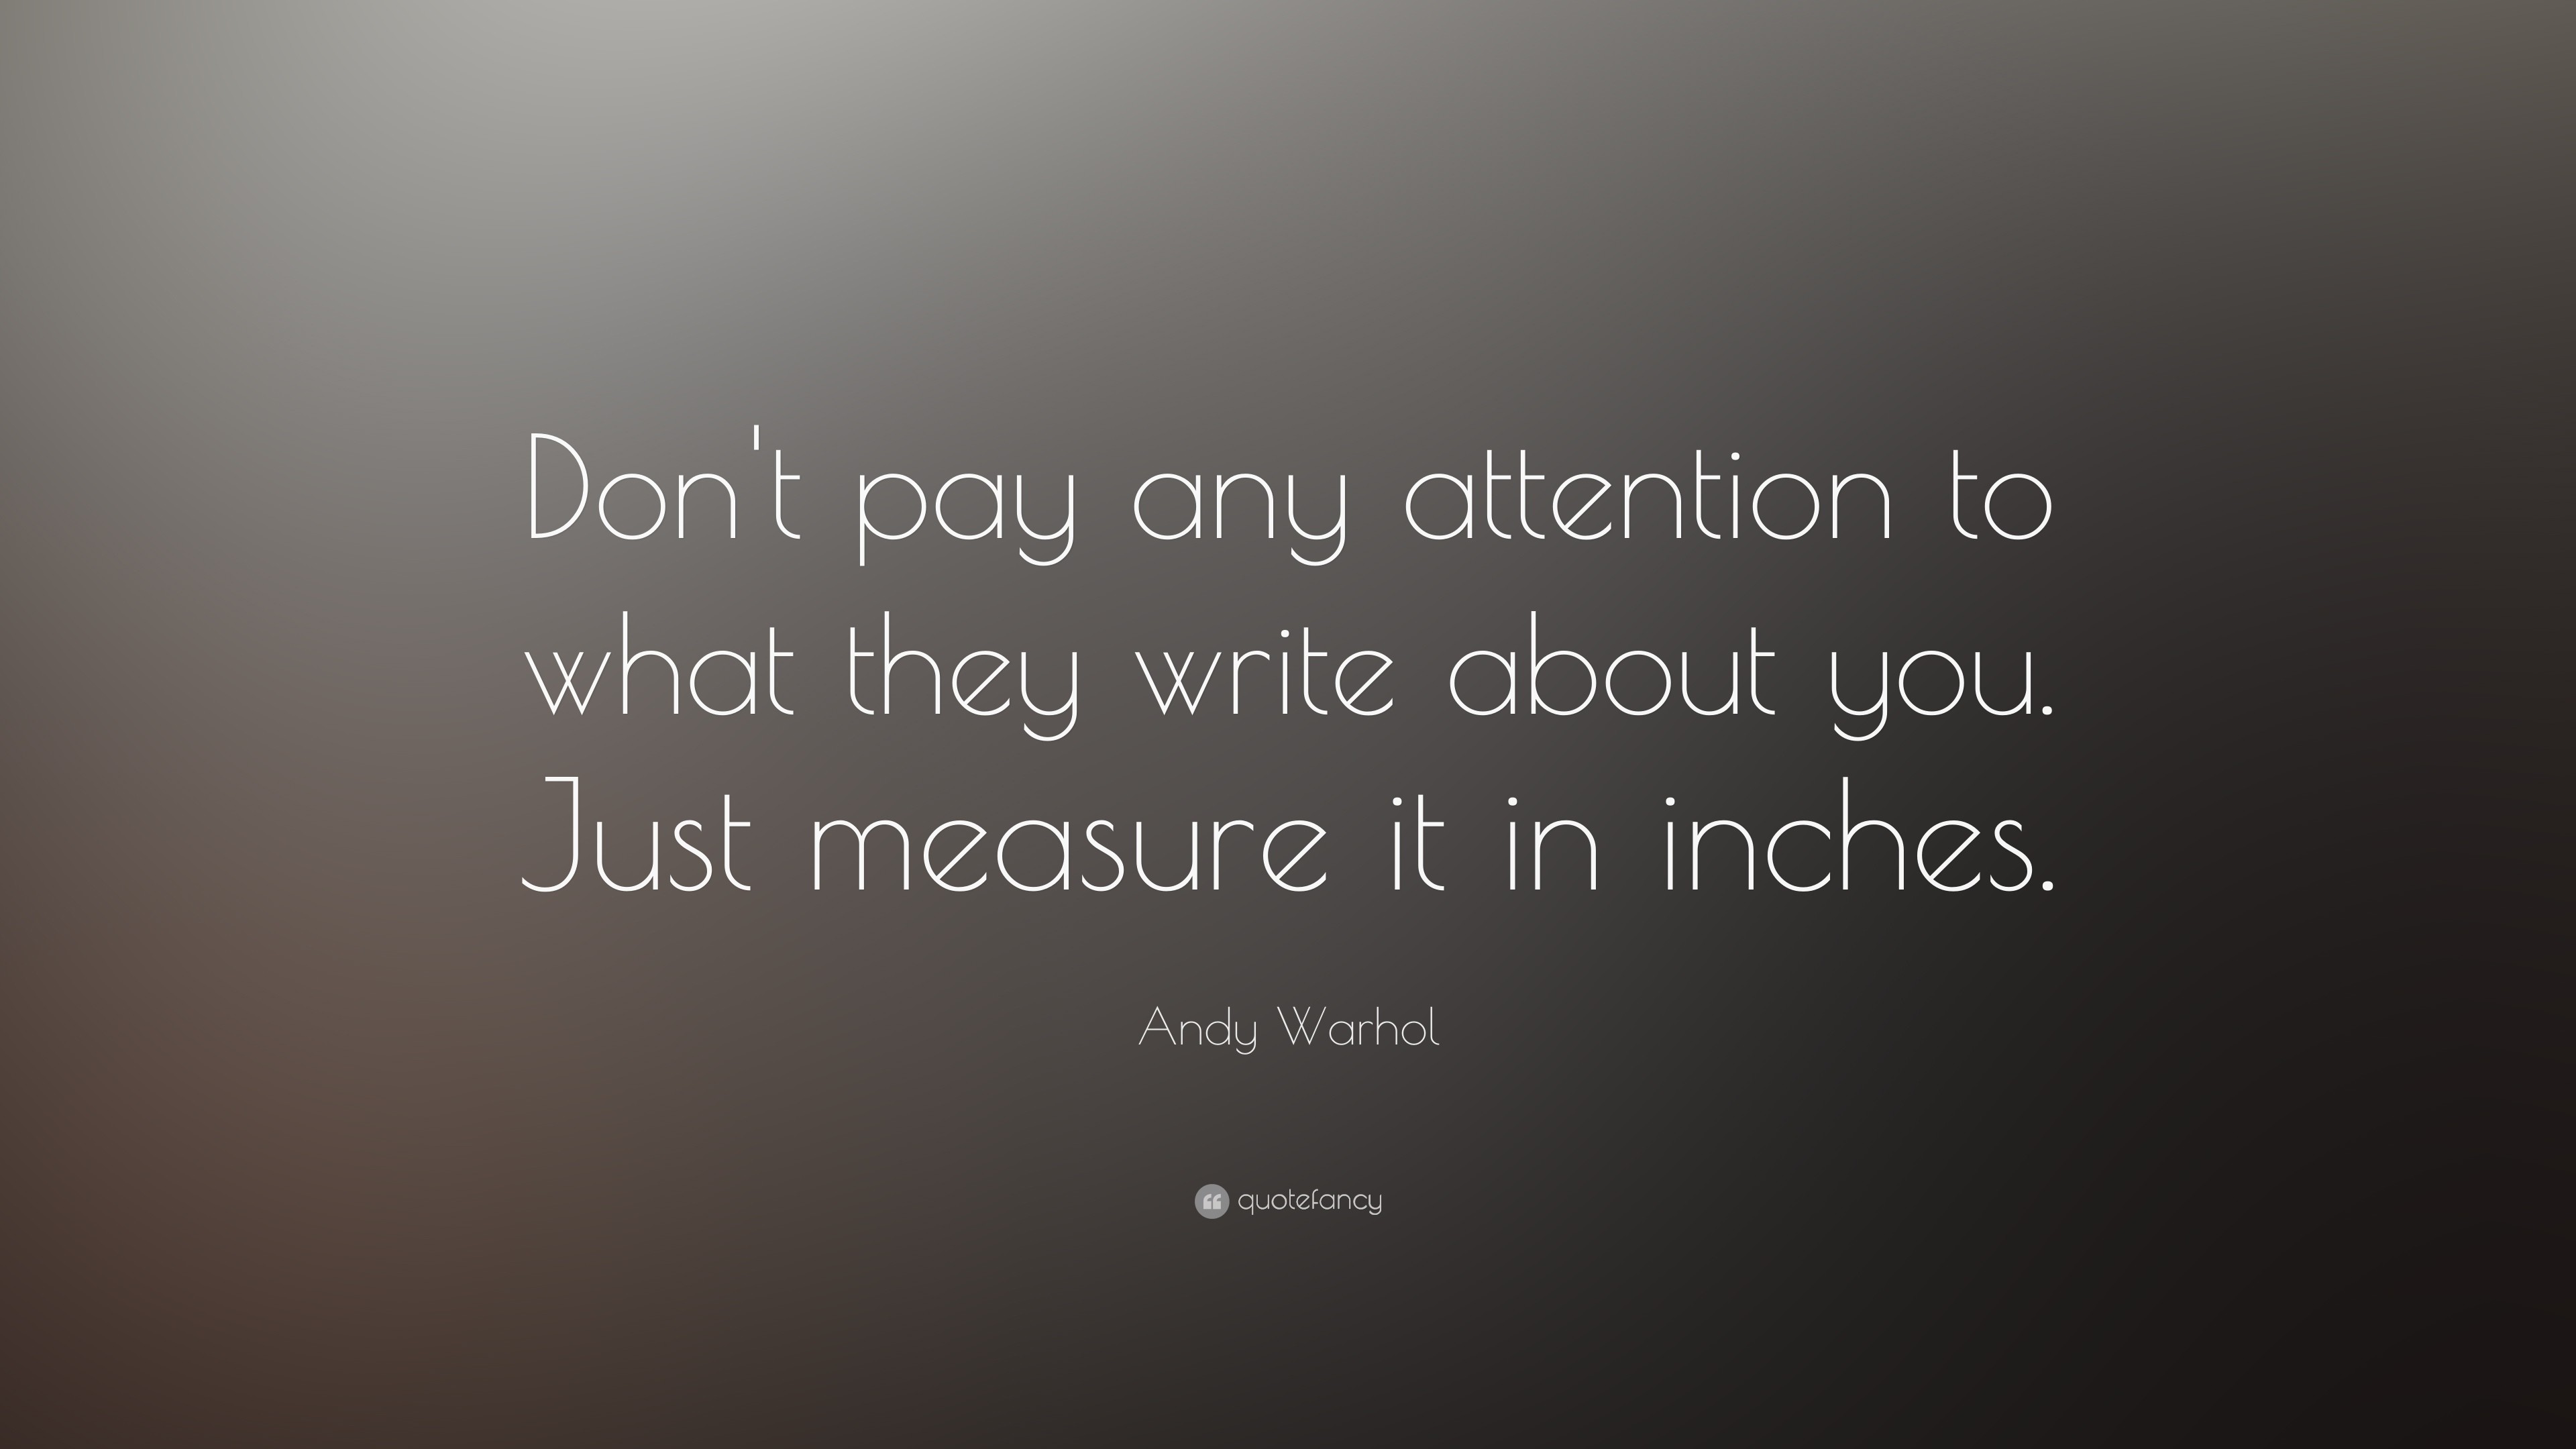 3840x2160 Andy Warhol Quote: “Don't pay any attention to what they write about